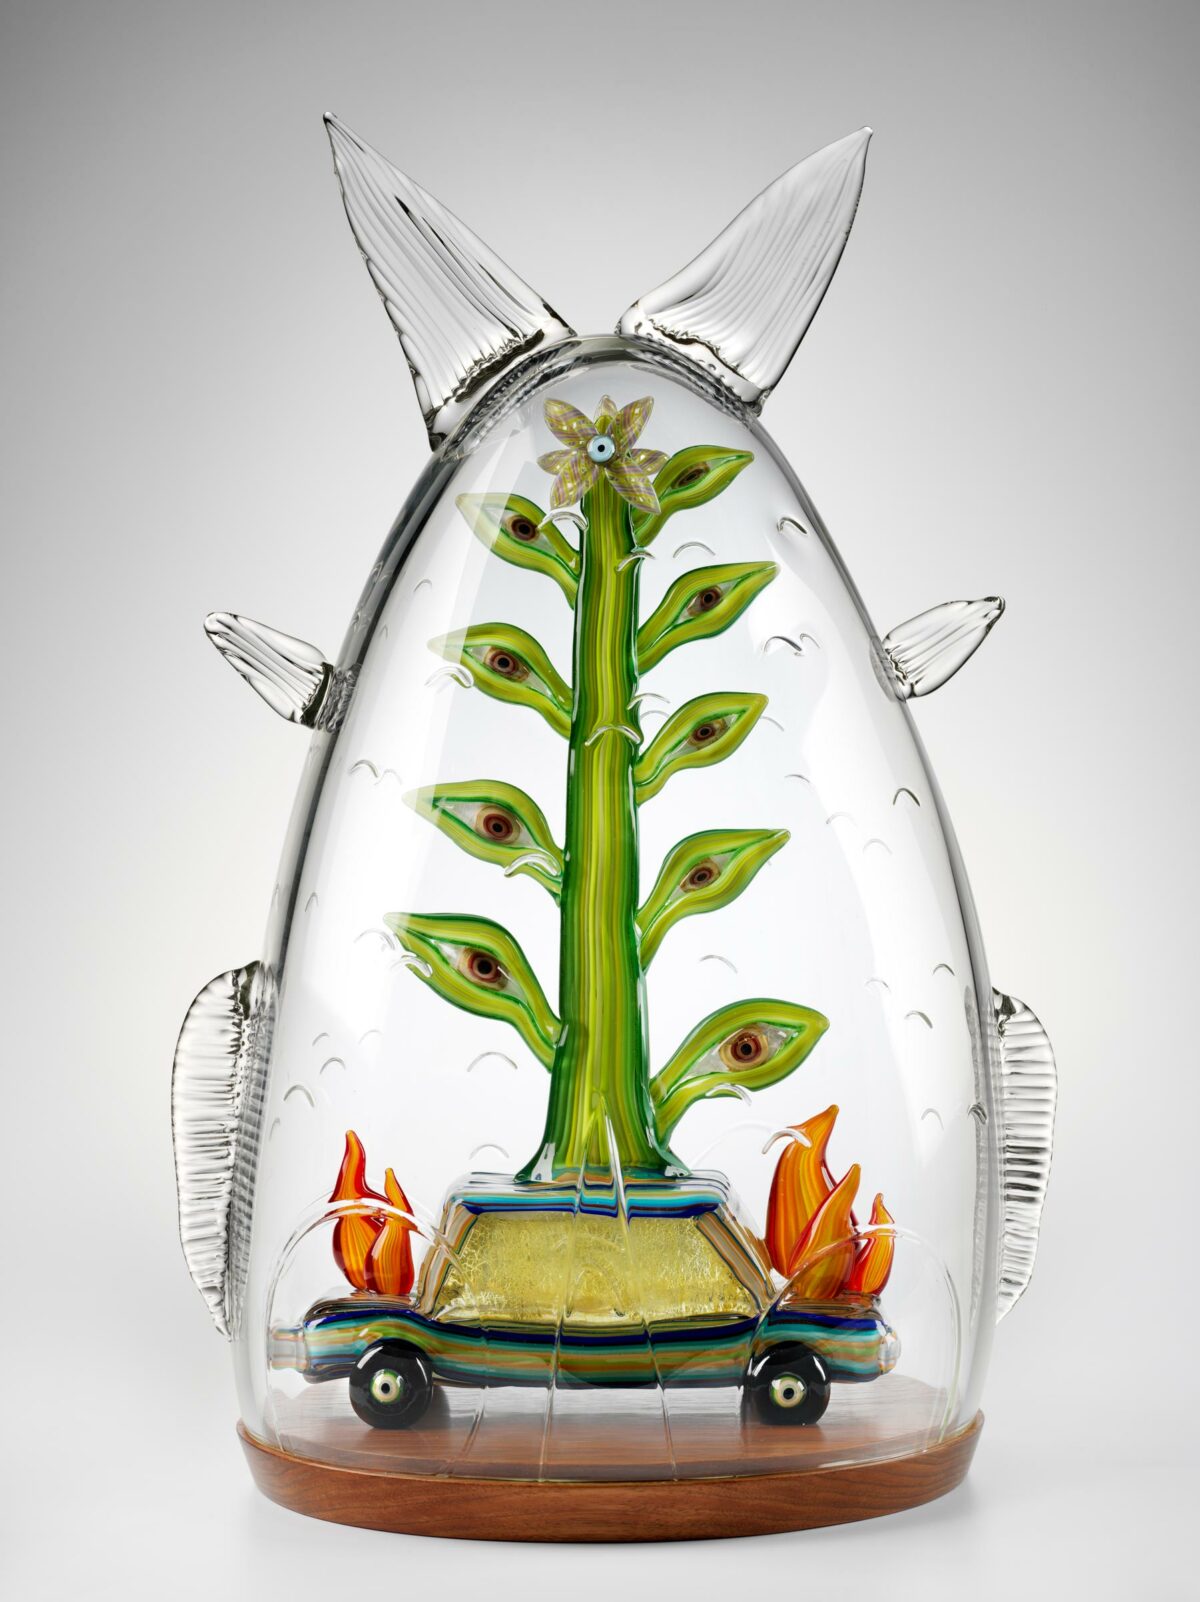 Fascinating Glass Sculptures Of Quirky Creatures And Objects By Tom Moore 9